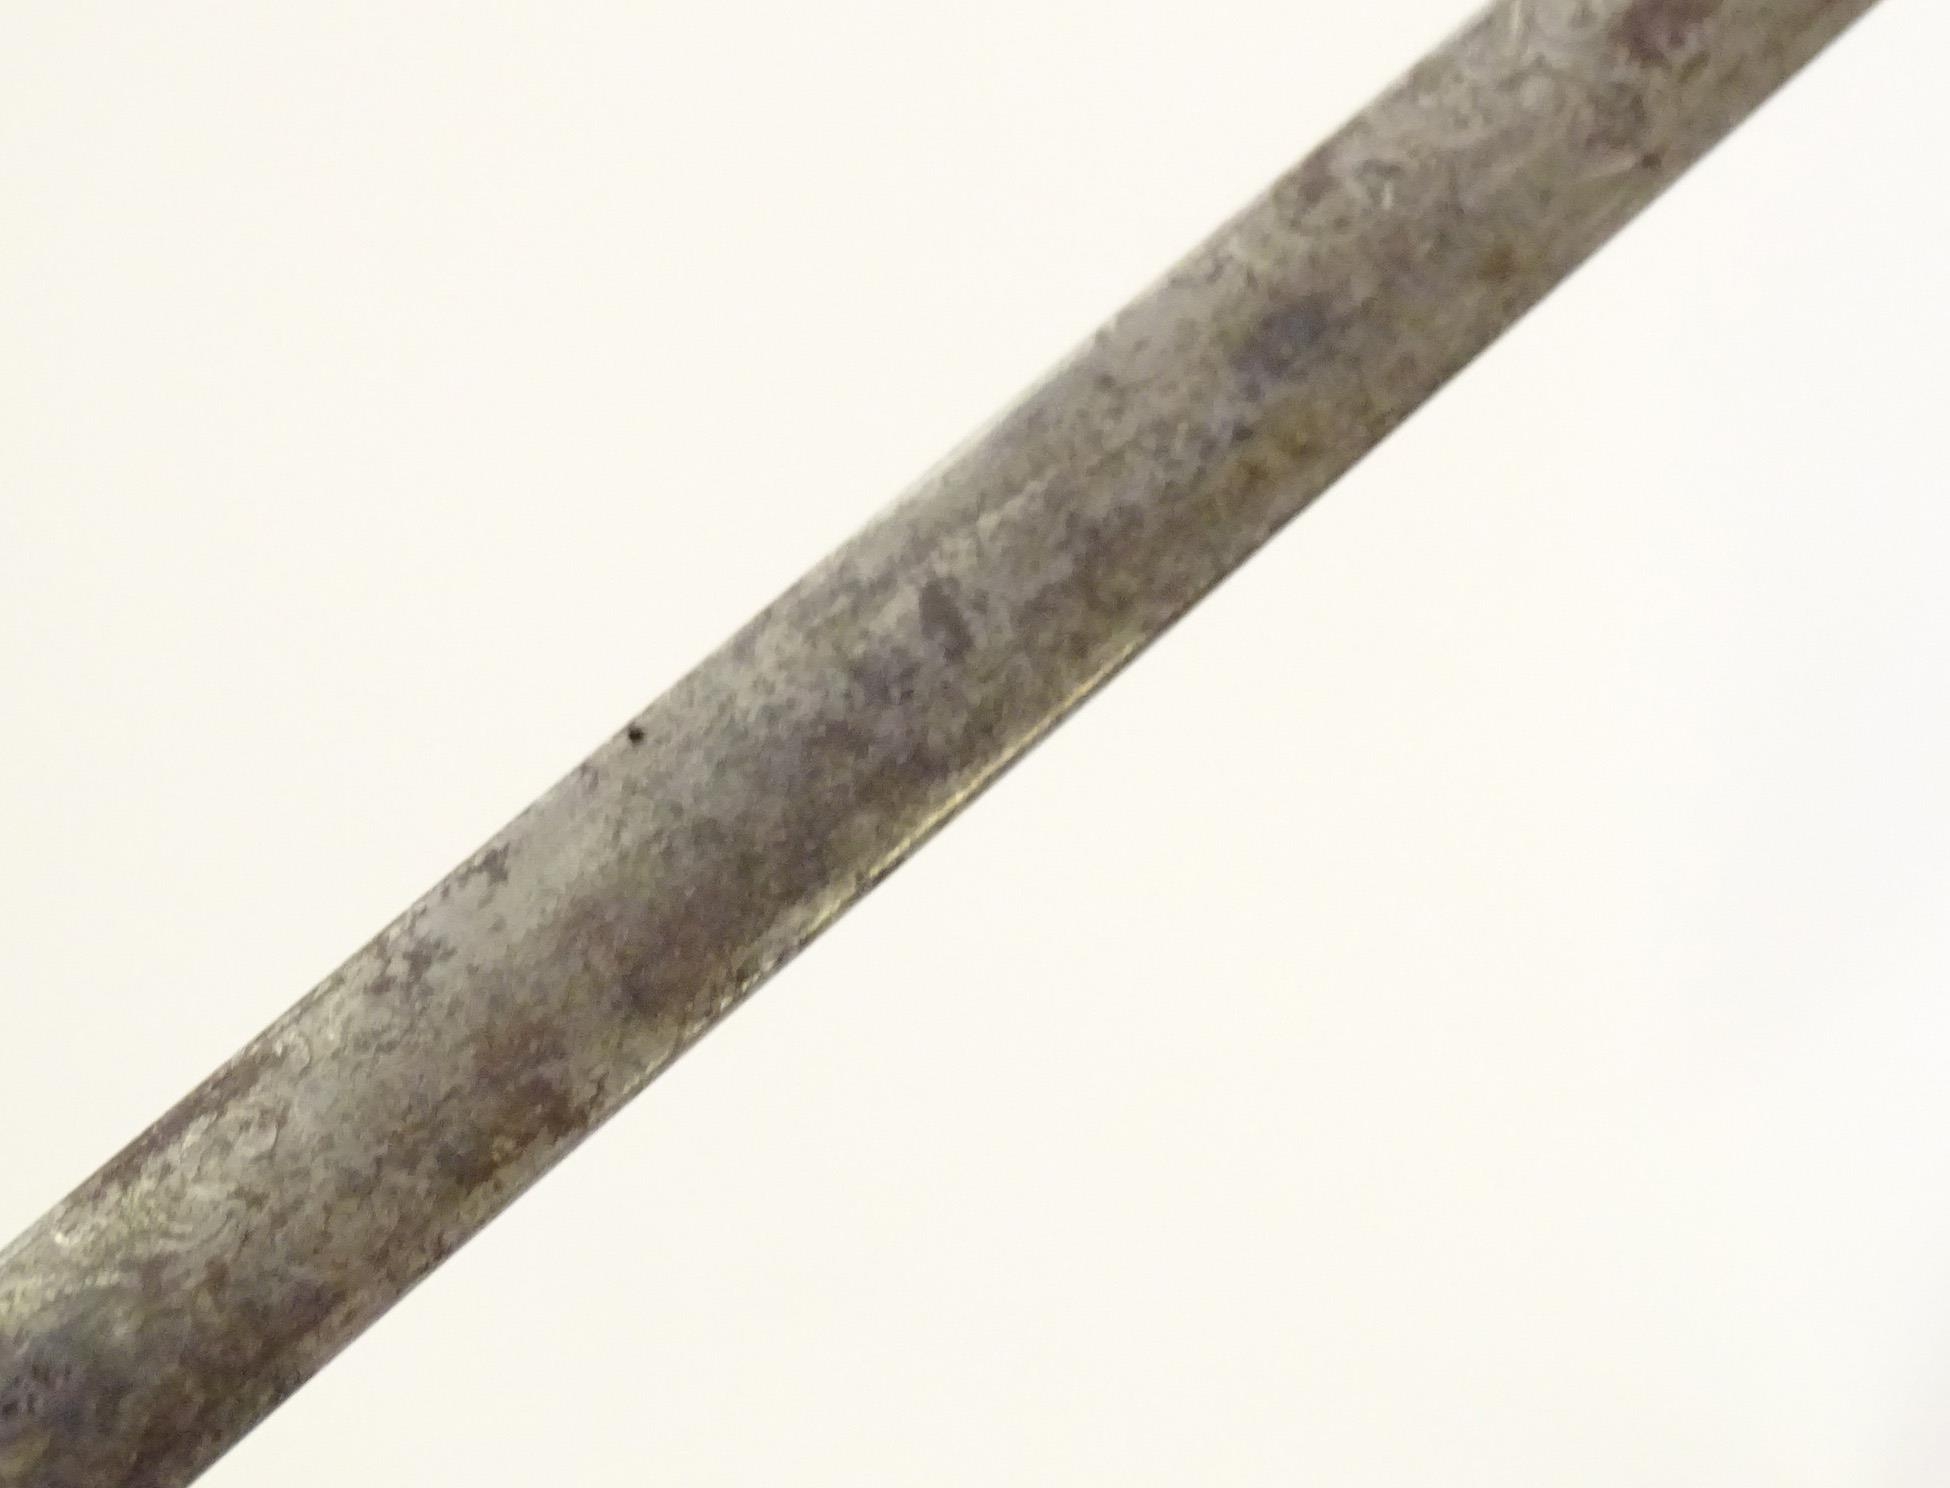 Militaria: an early to mid 20thC English court sword, the 30 3/4" steel blade decorated with - Image 9 of 15